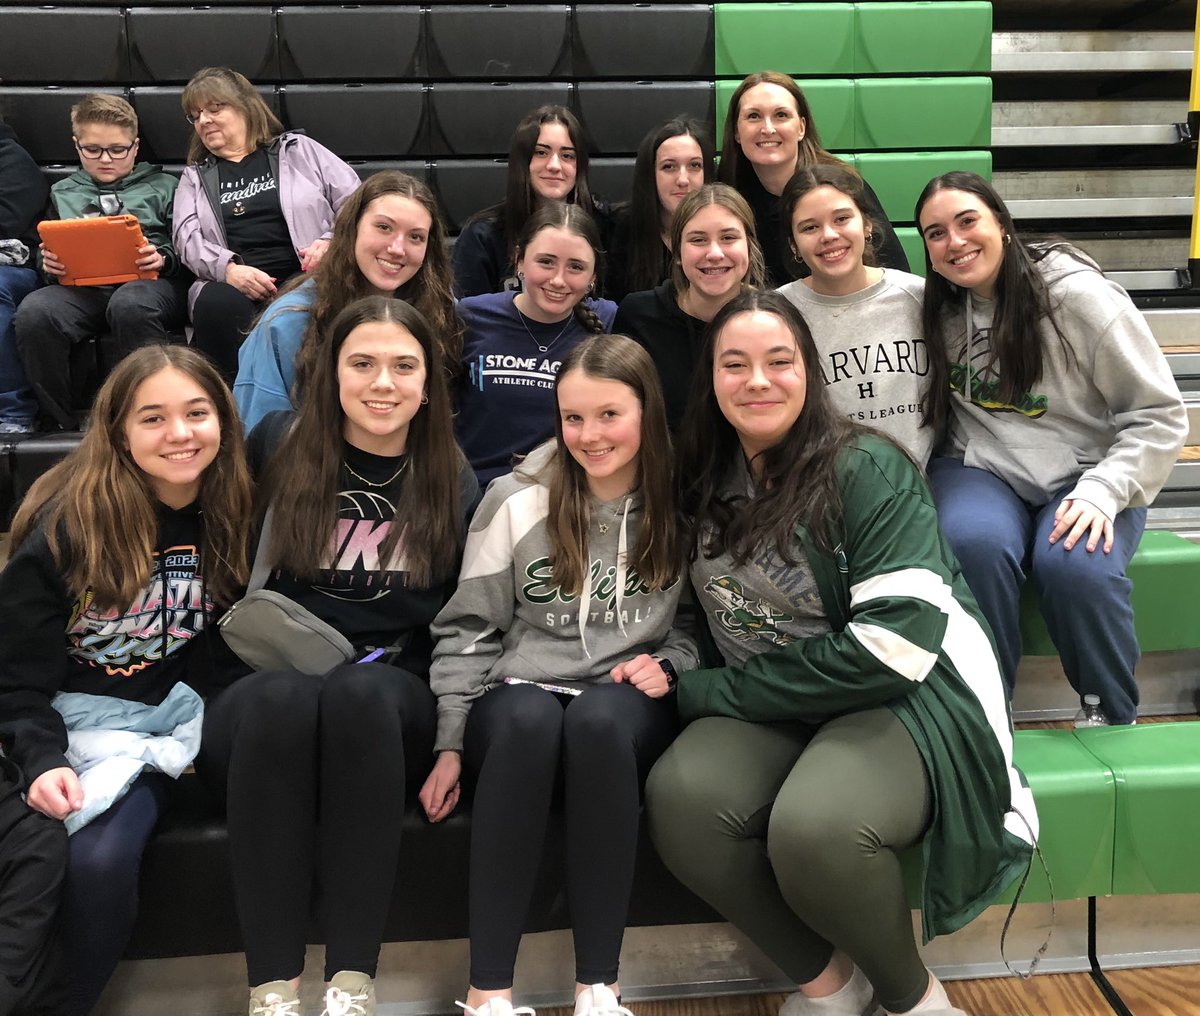 These amazing former student-athletes came out to cheer on the Lady Panthers tonight! What an amazing surprise. Once a Panther always a Panther 💚🏐💛 #PantherPride #classof22 #BeEvergreen